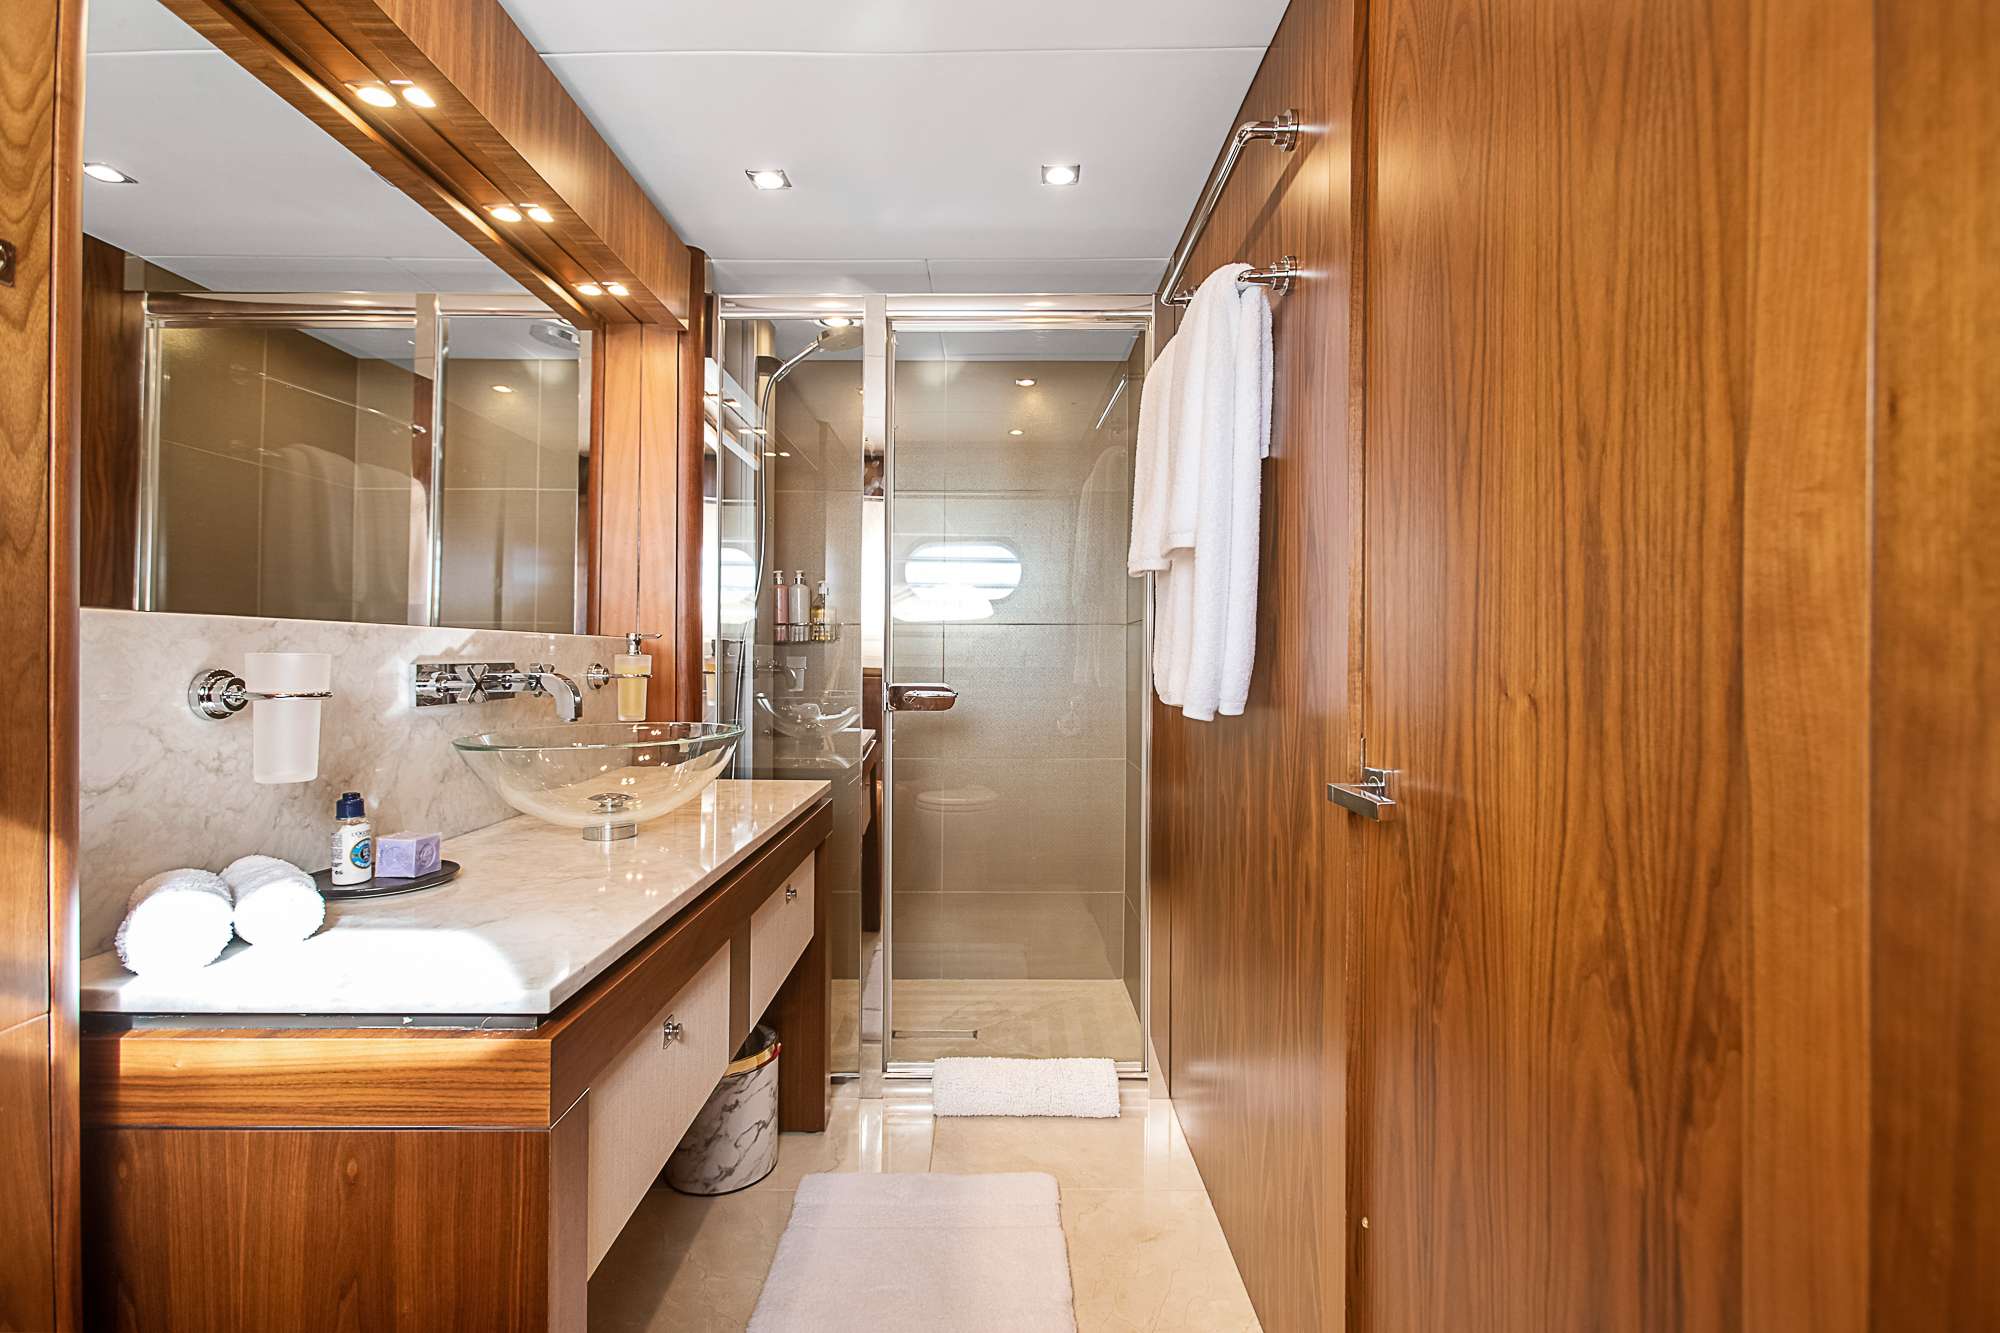 EVEREAST Yacht Charter - Port VIP ensuite